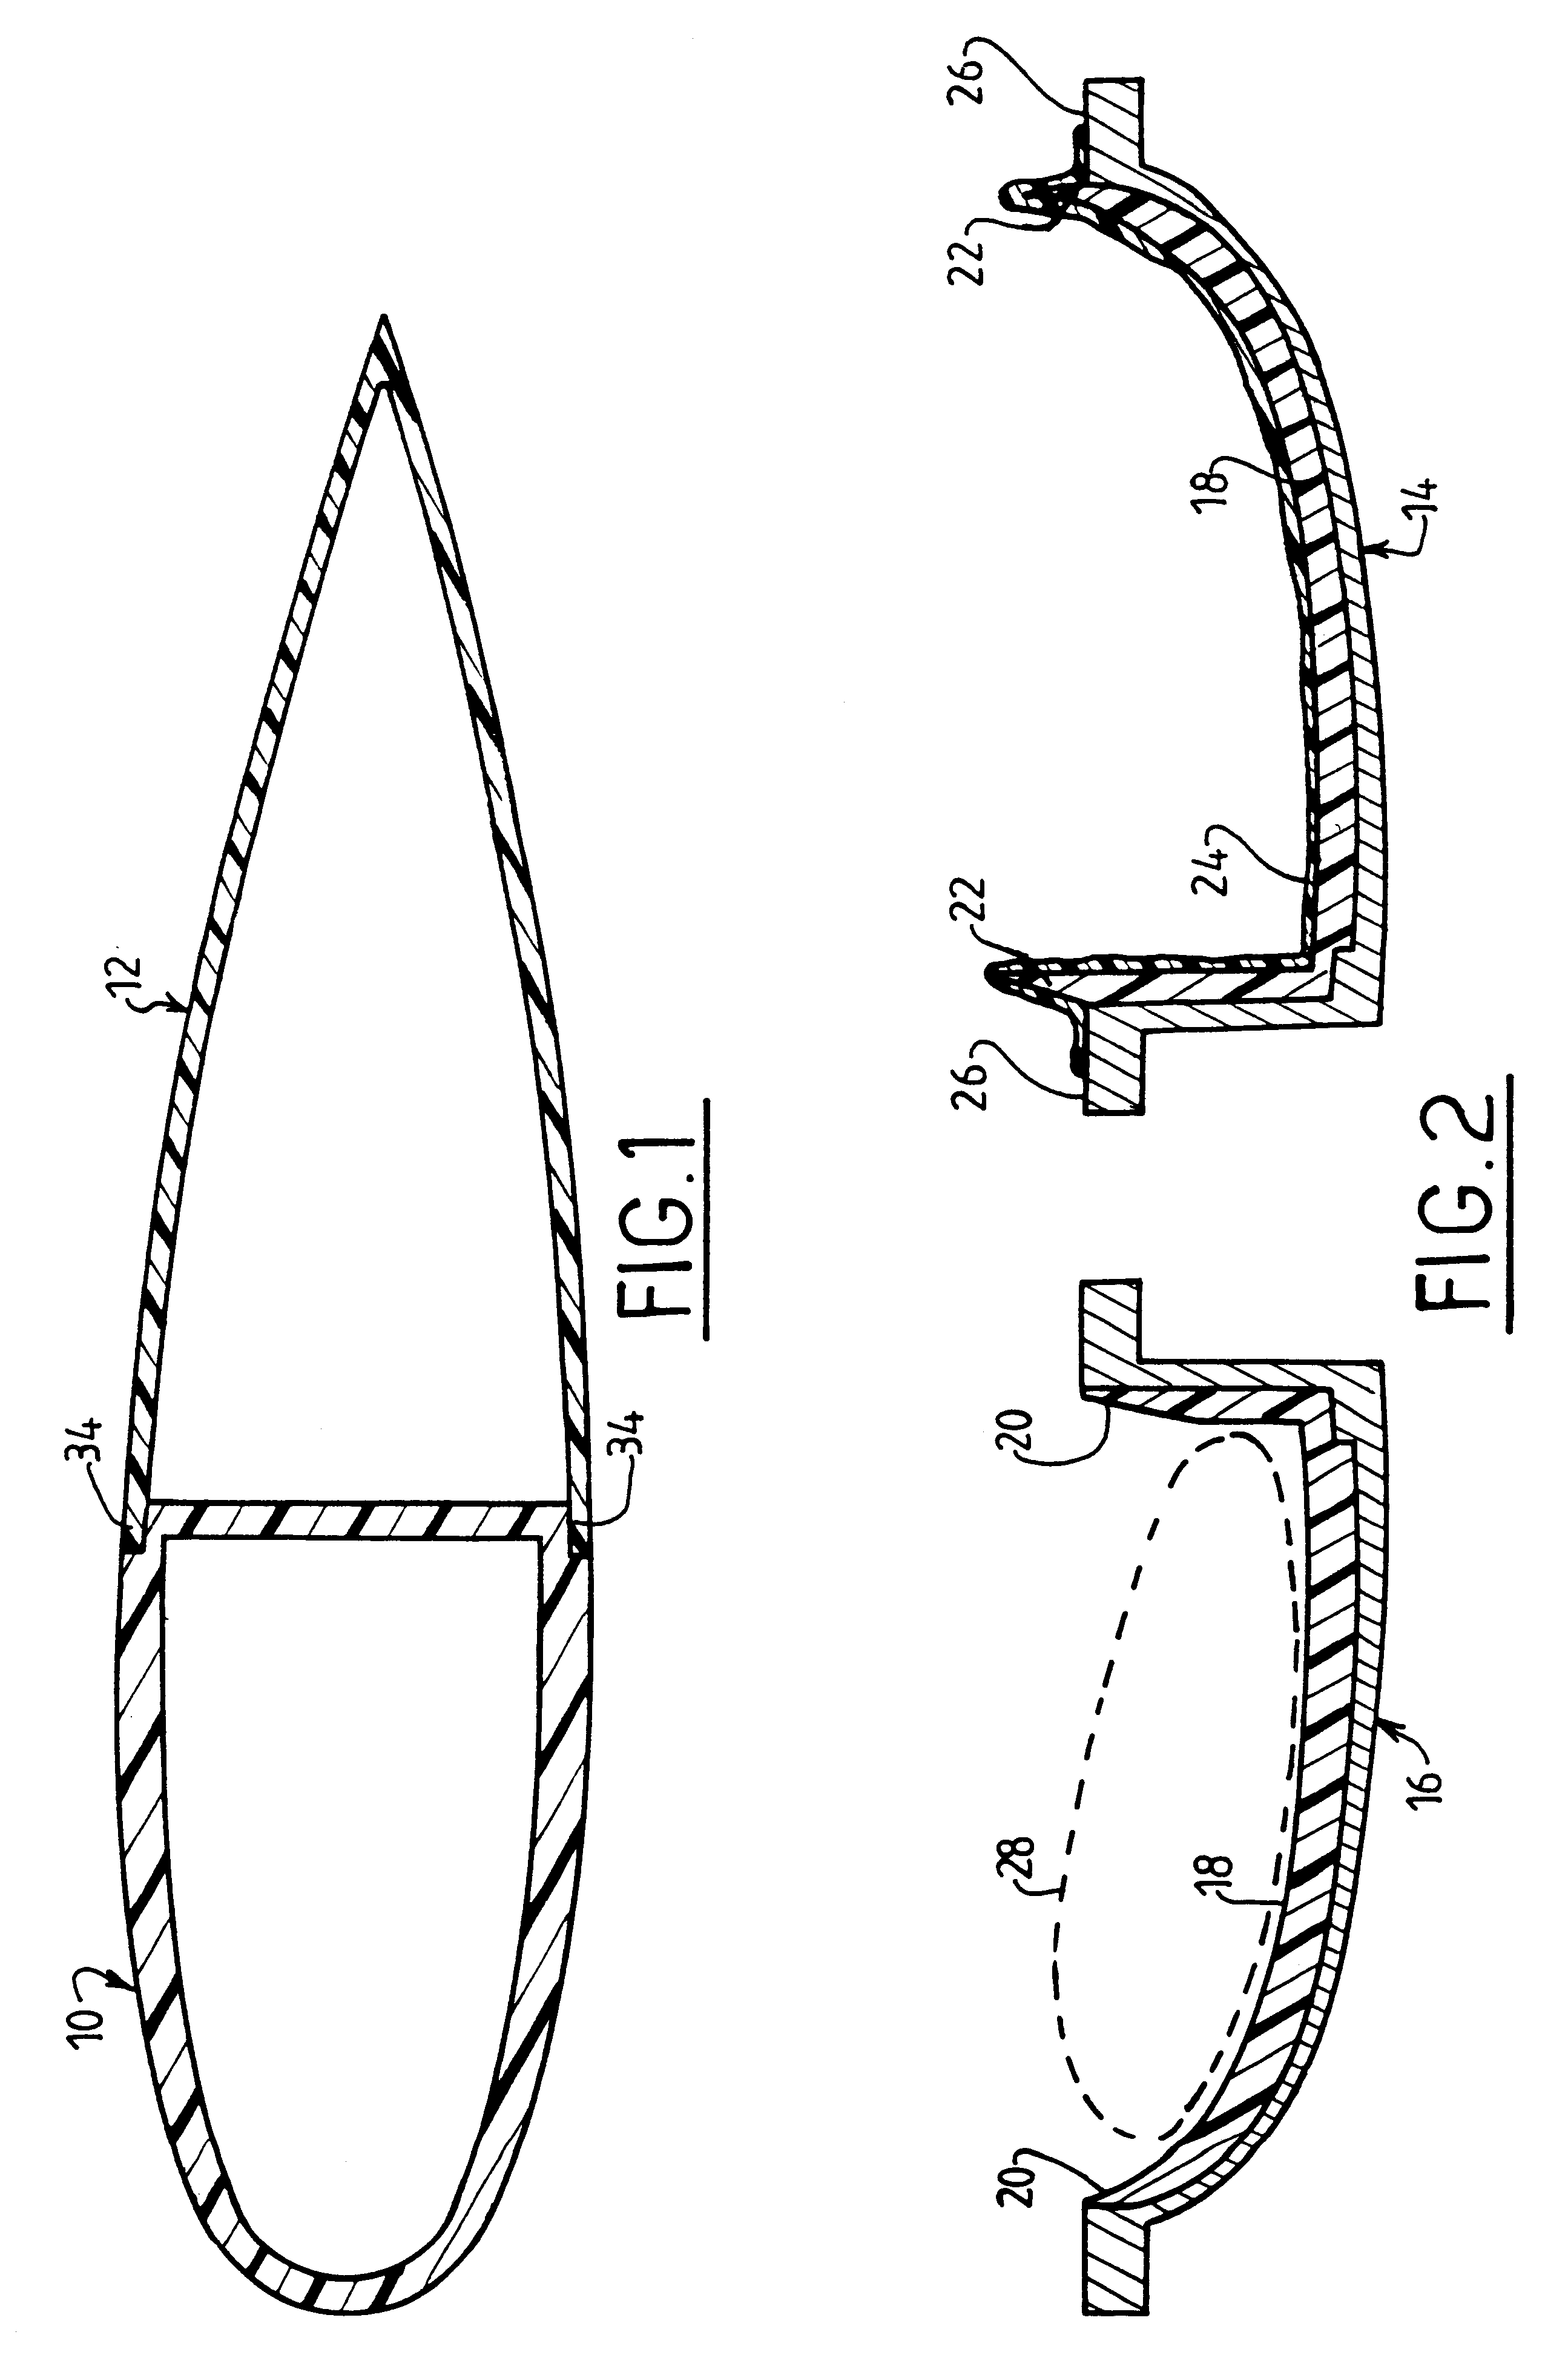 Method of making a part of large dimensions out of composite material